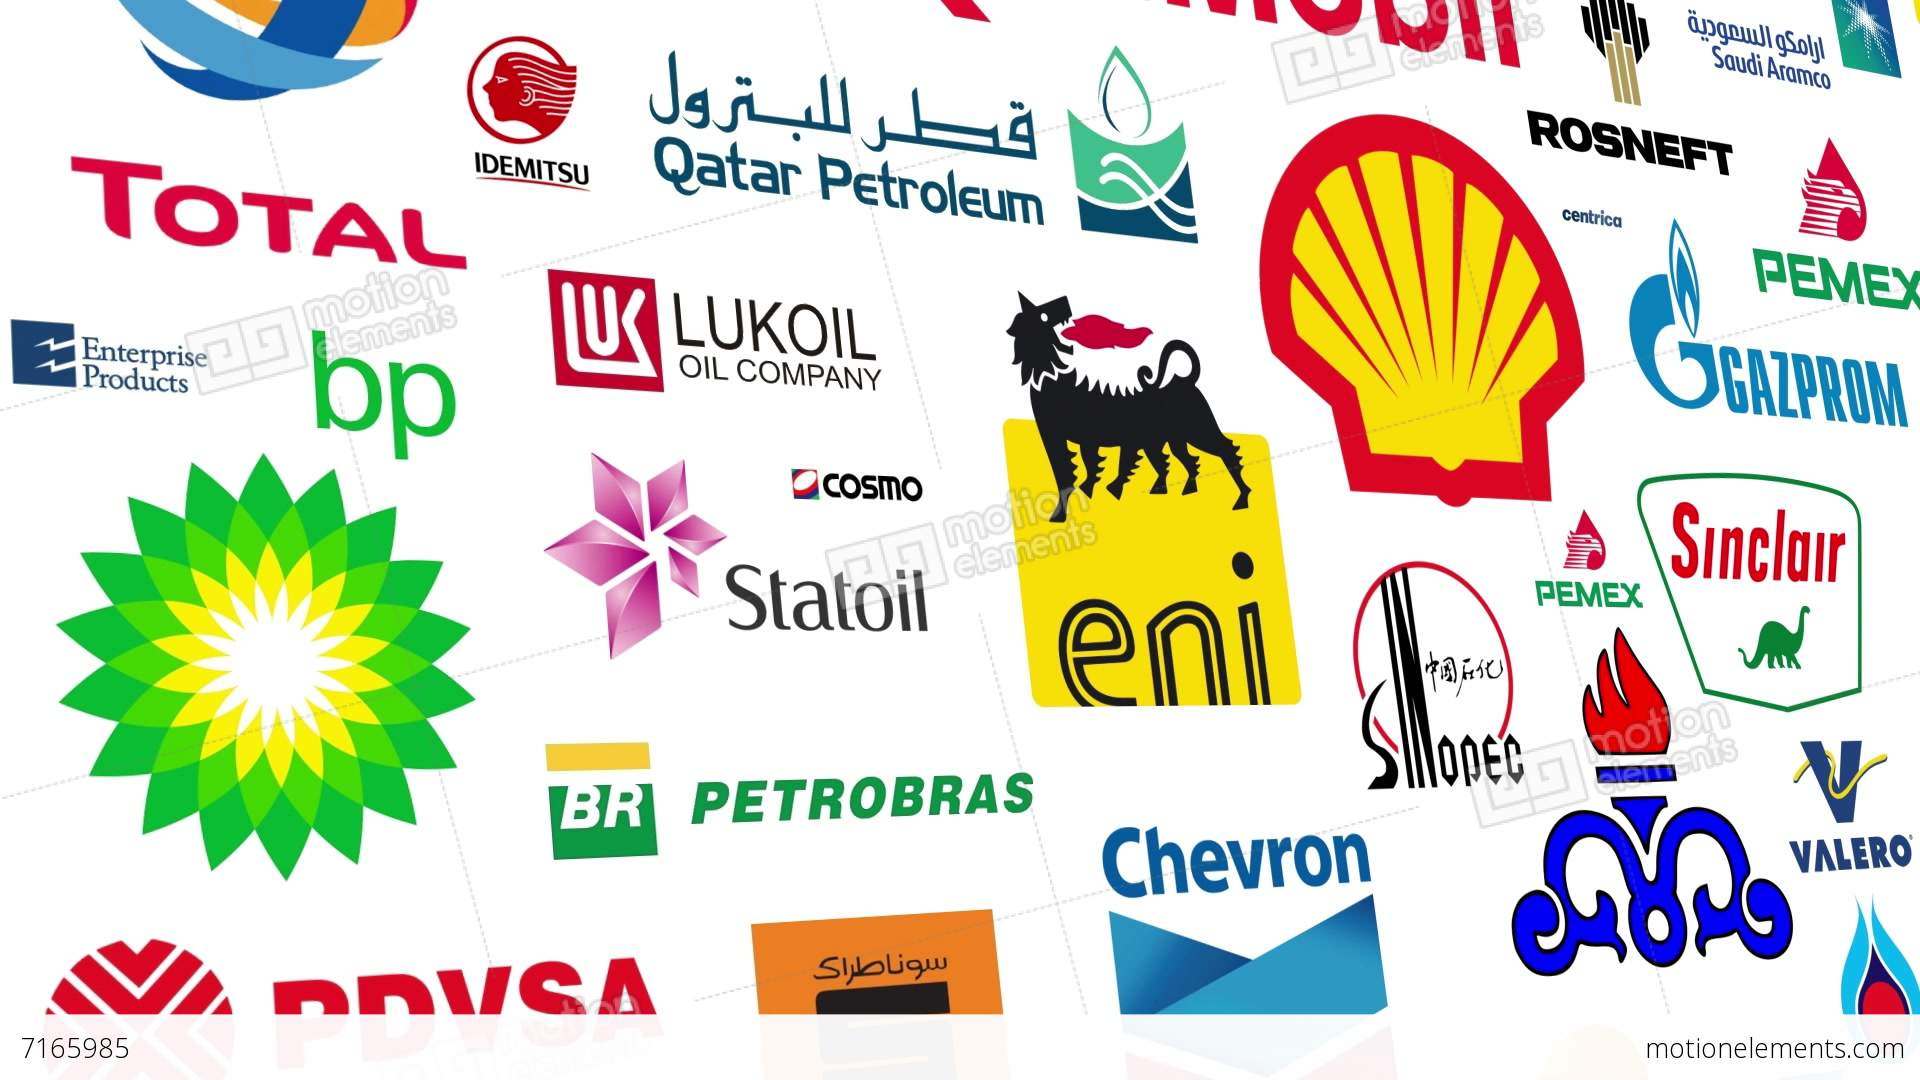 Total Oil Company Logo - Oil and Gas Industry: Salary of Shell, Total, Mobil, Schlumberger ...